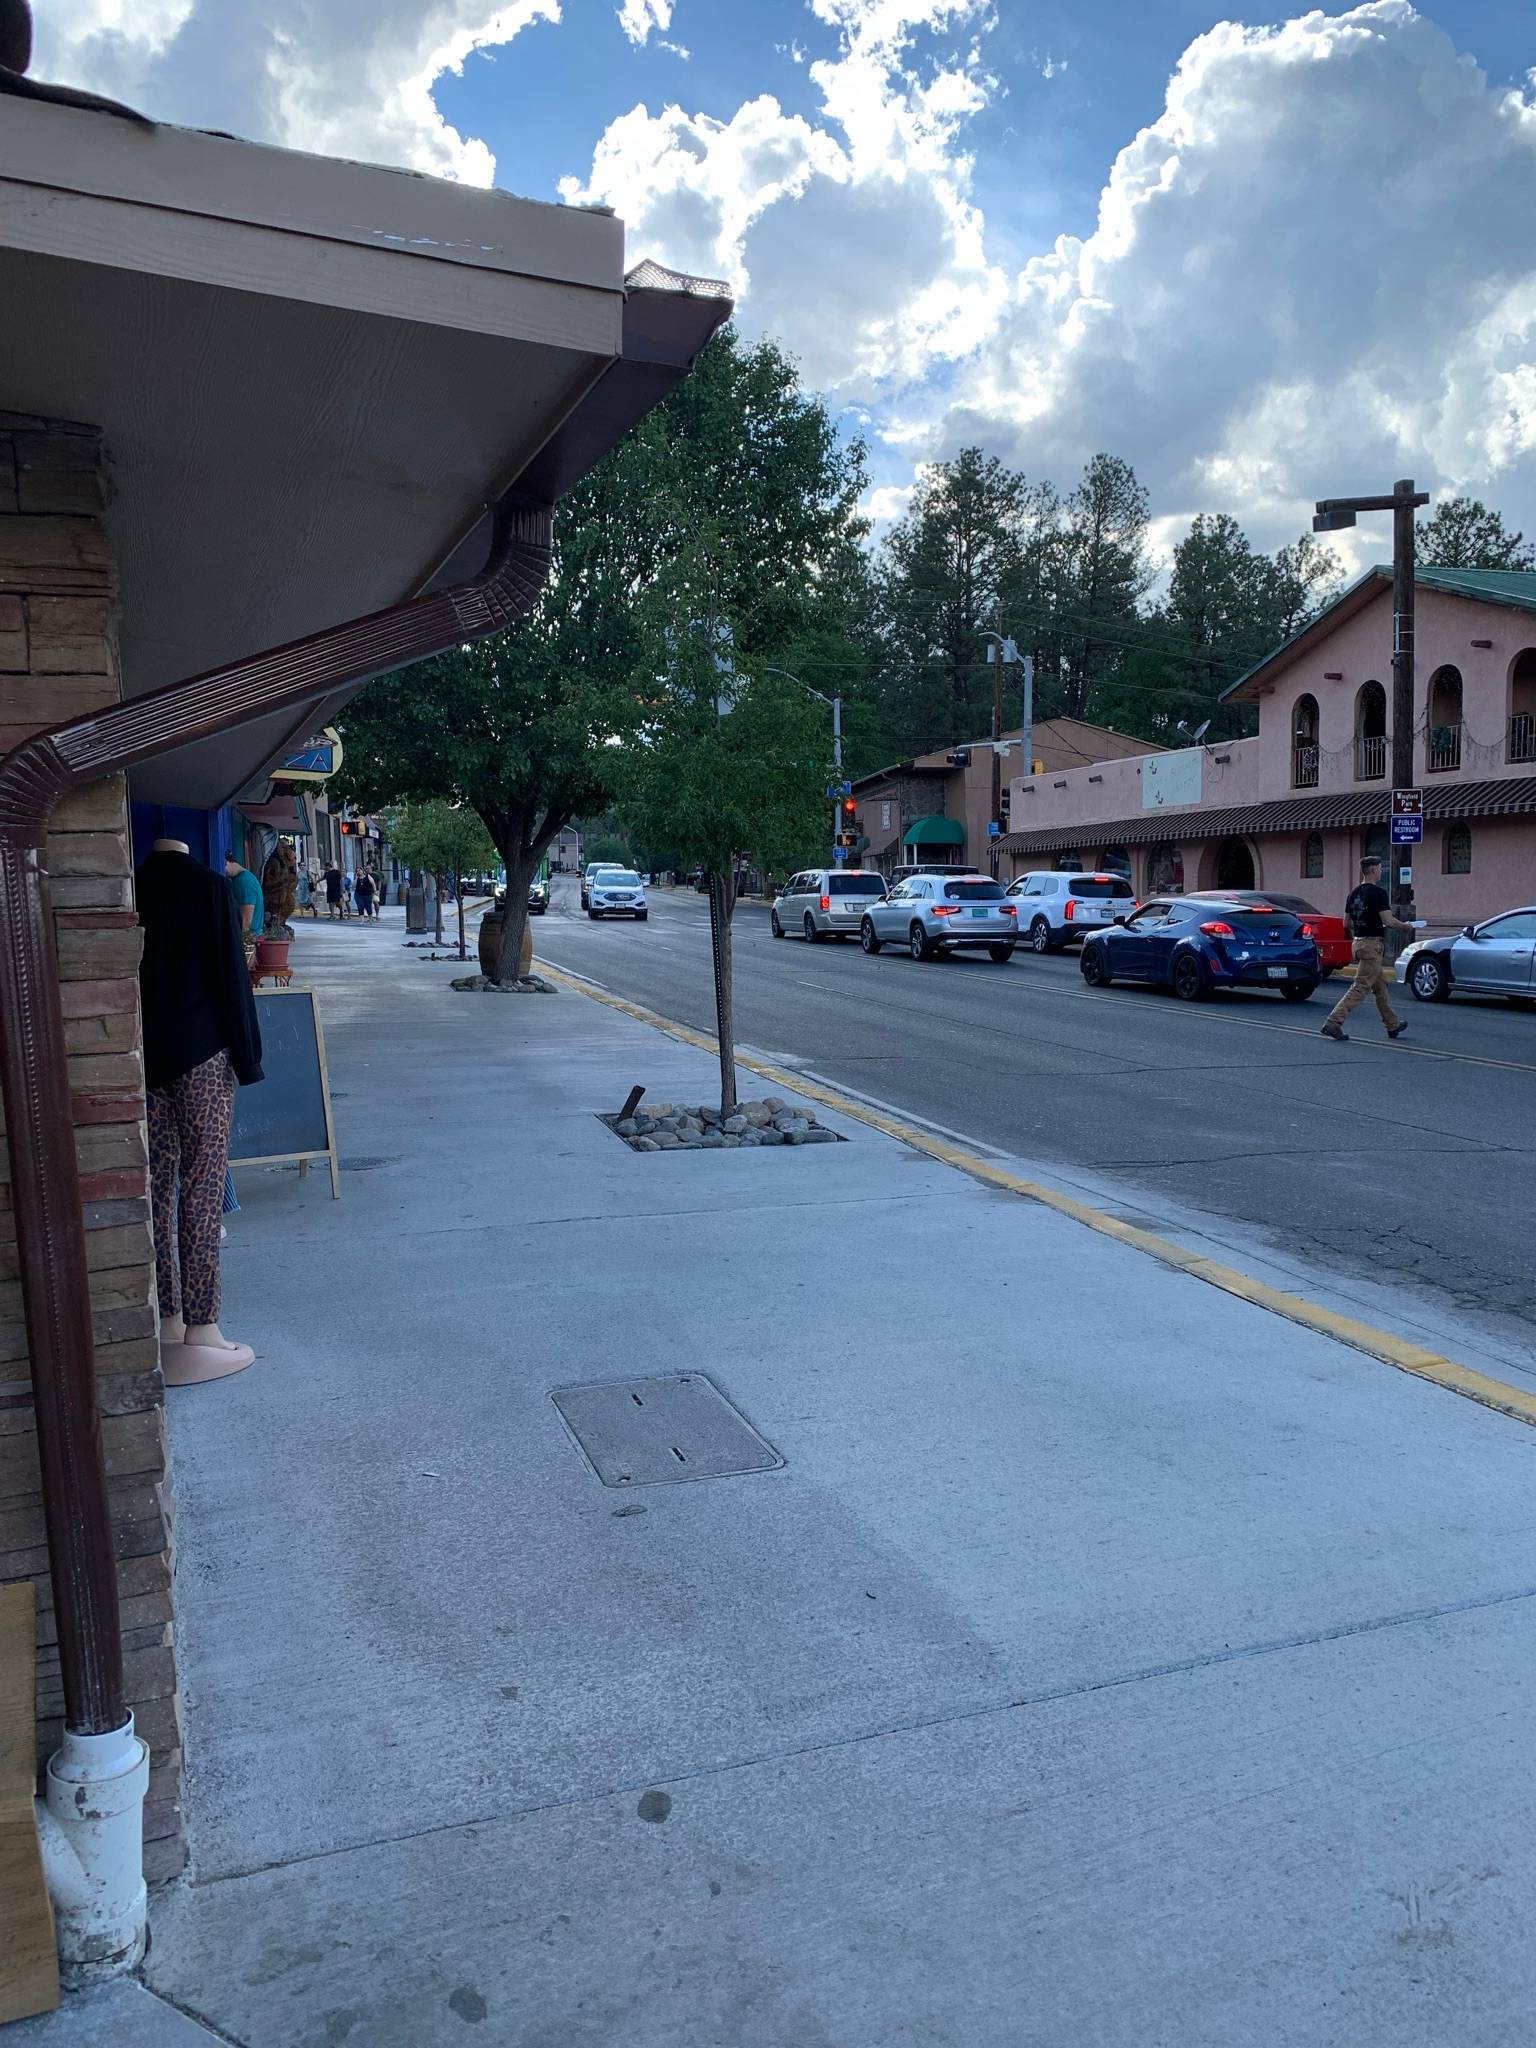 A Visit to Ruidoso, New Mexico